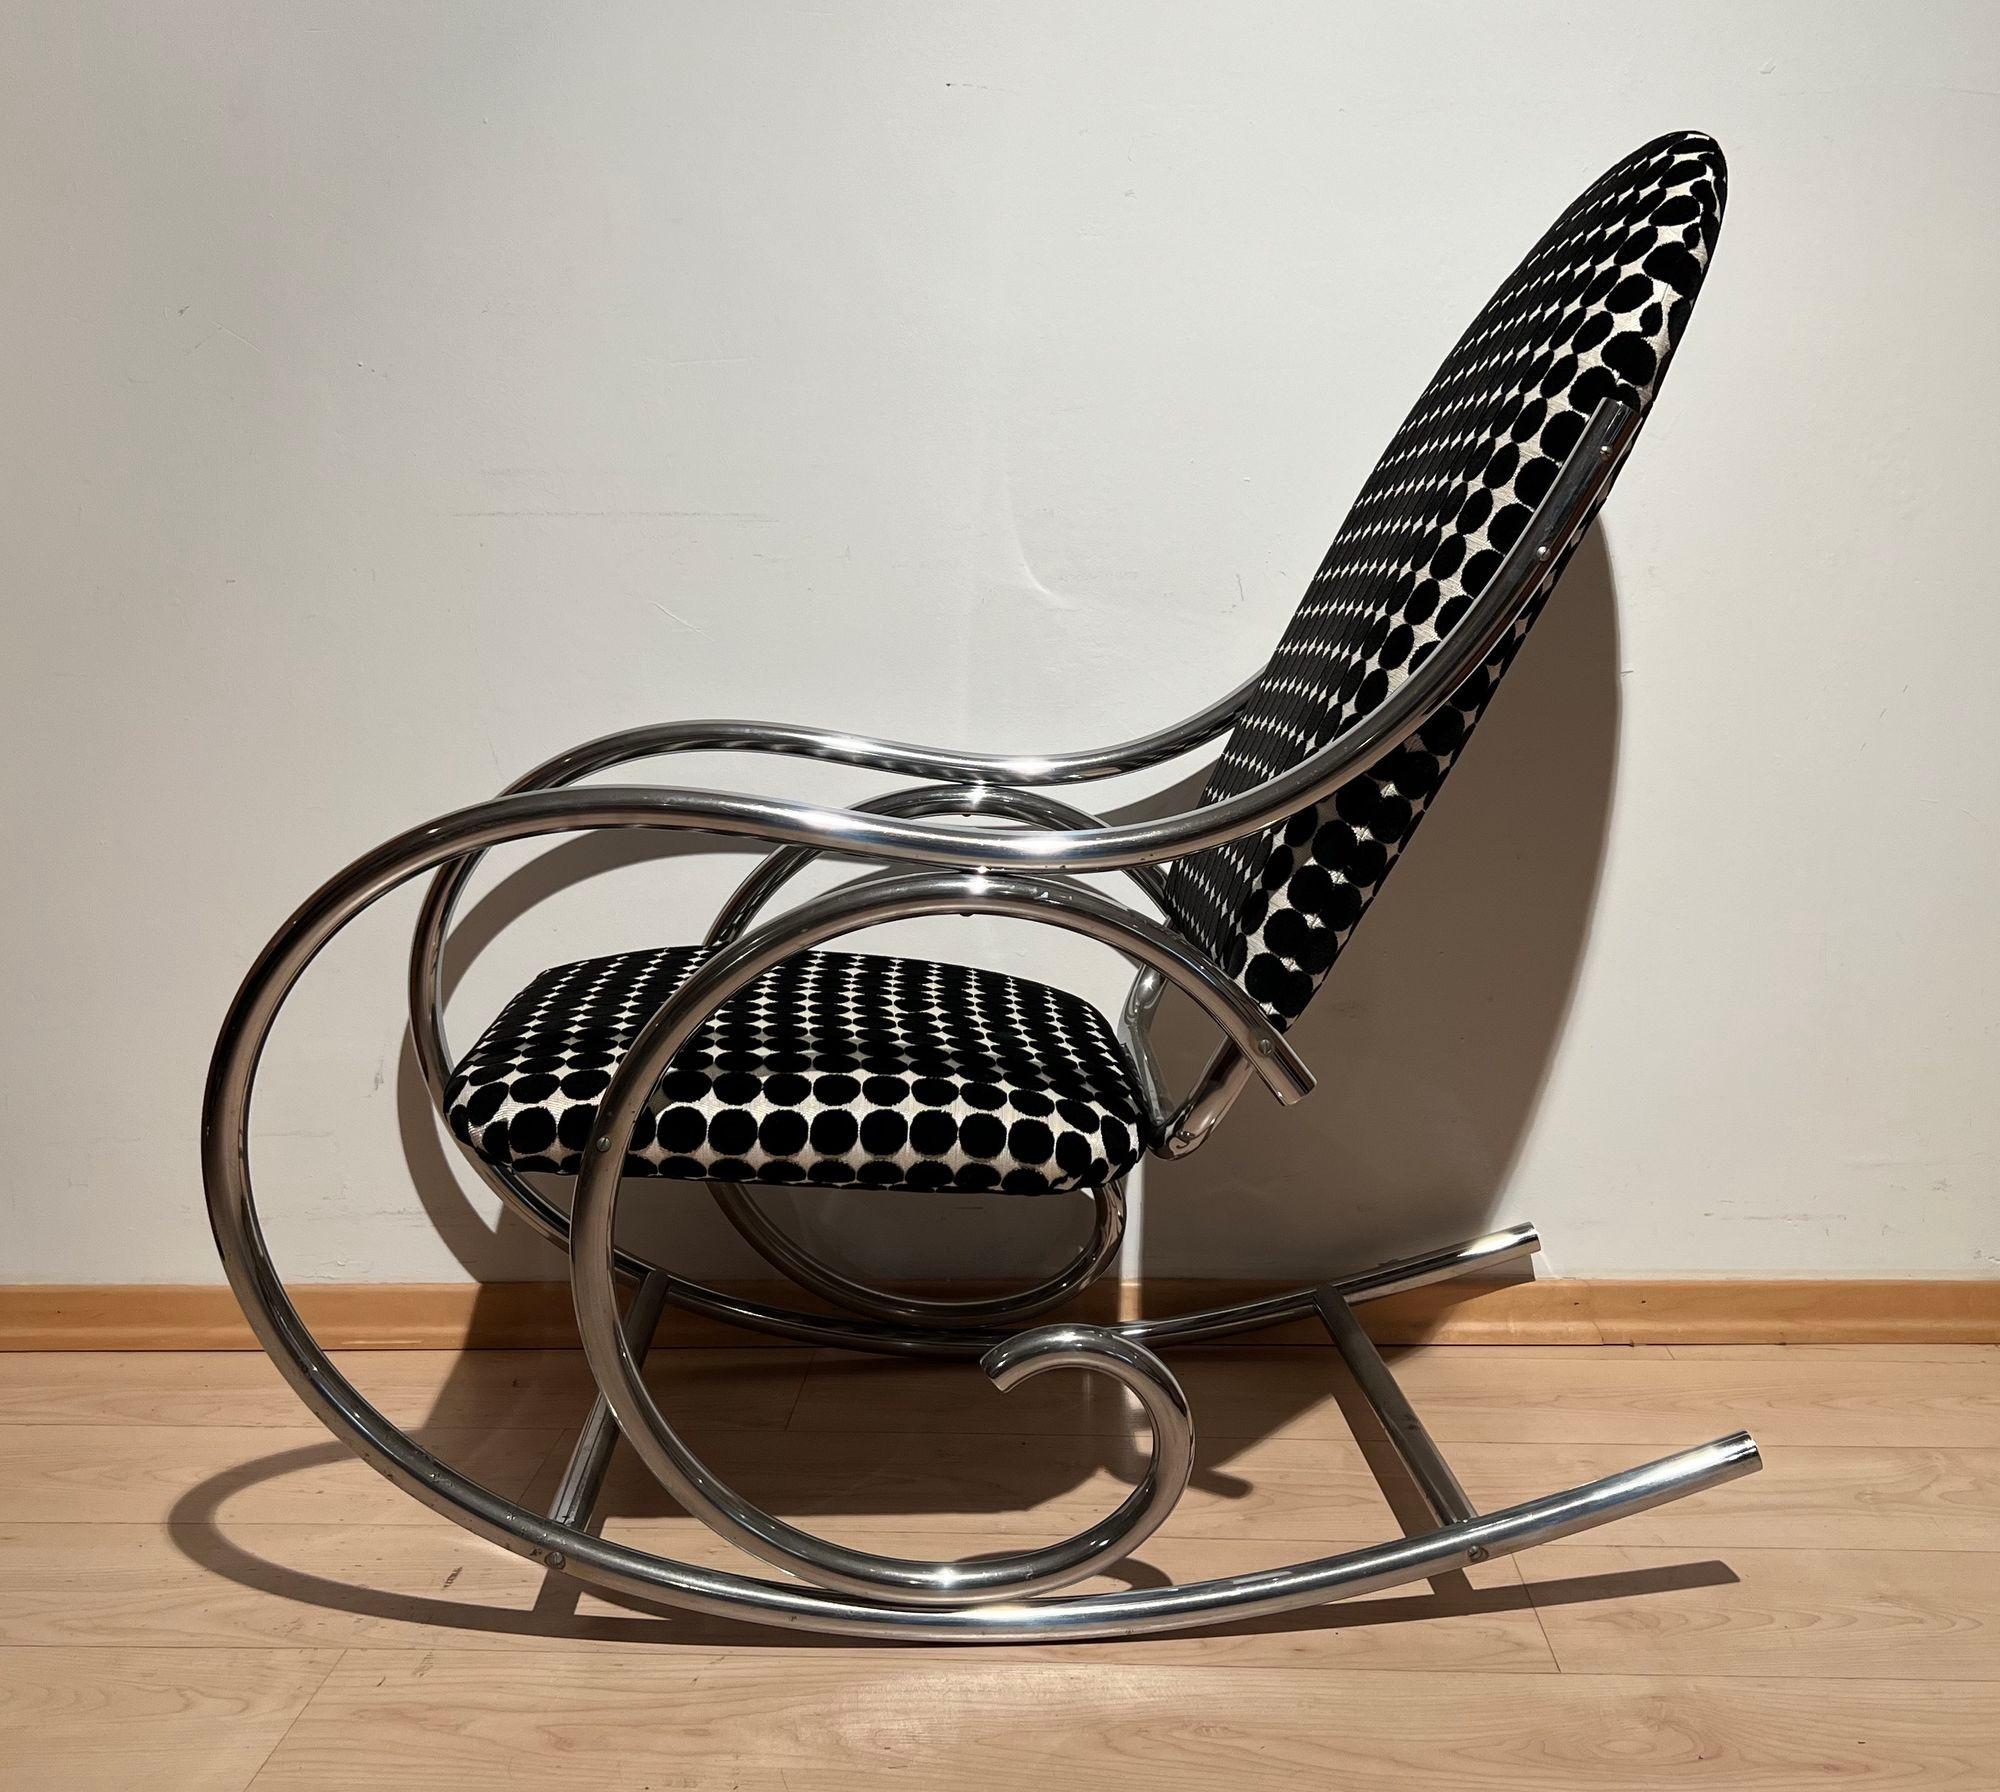 Original, rare Bauhaus Rocking Chair from Germany circa 1920/30s.
Chrome-plated thick bent steeltubes with original galvanization, well reserved and polished. The seat and back are upholstered with a black-white dots fabric from JAB. Could be